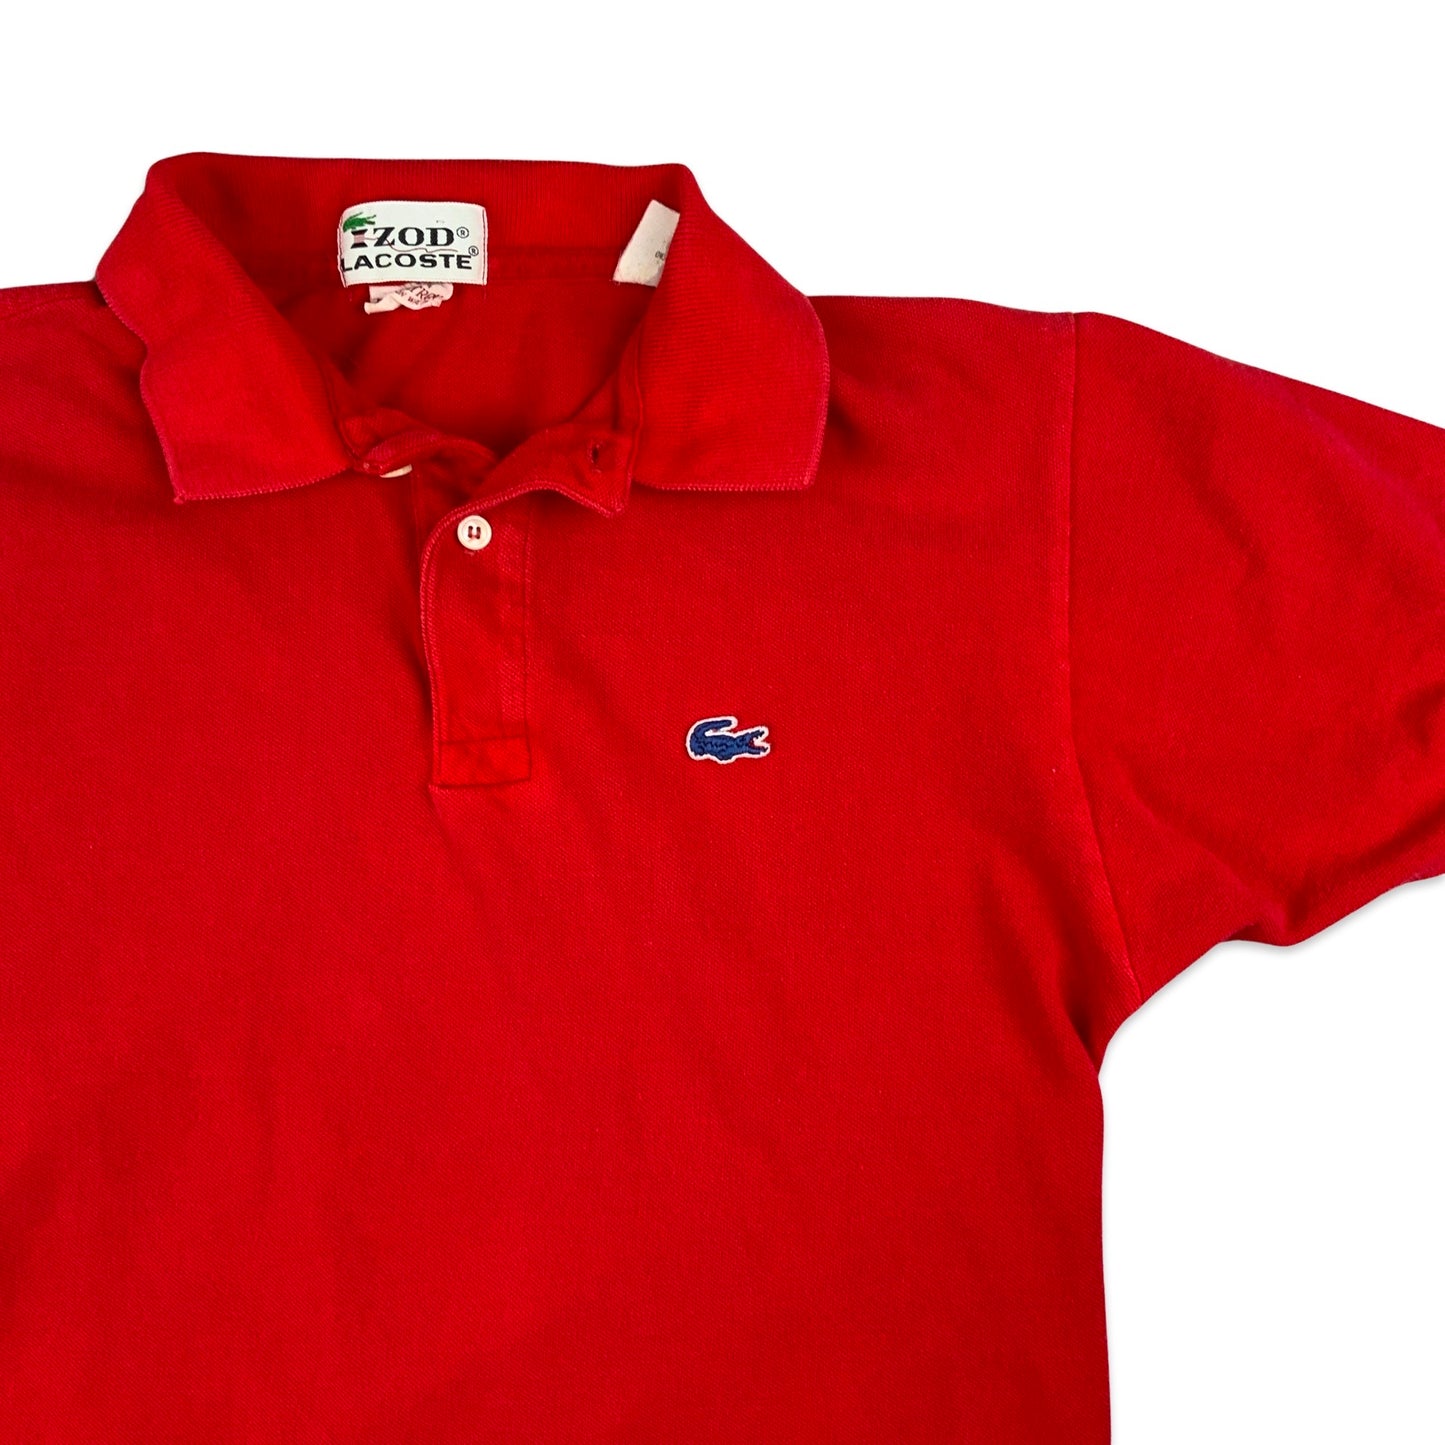 Vintage 70s Lacoste Red Polo Shirt Rare S M